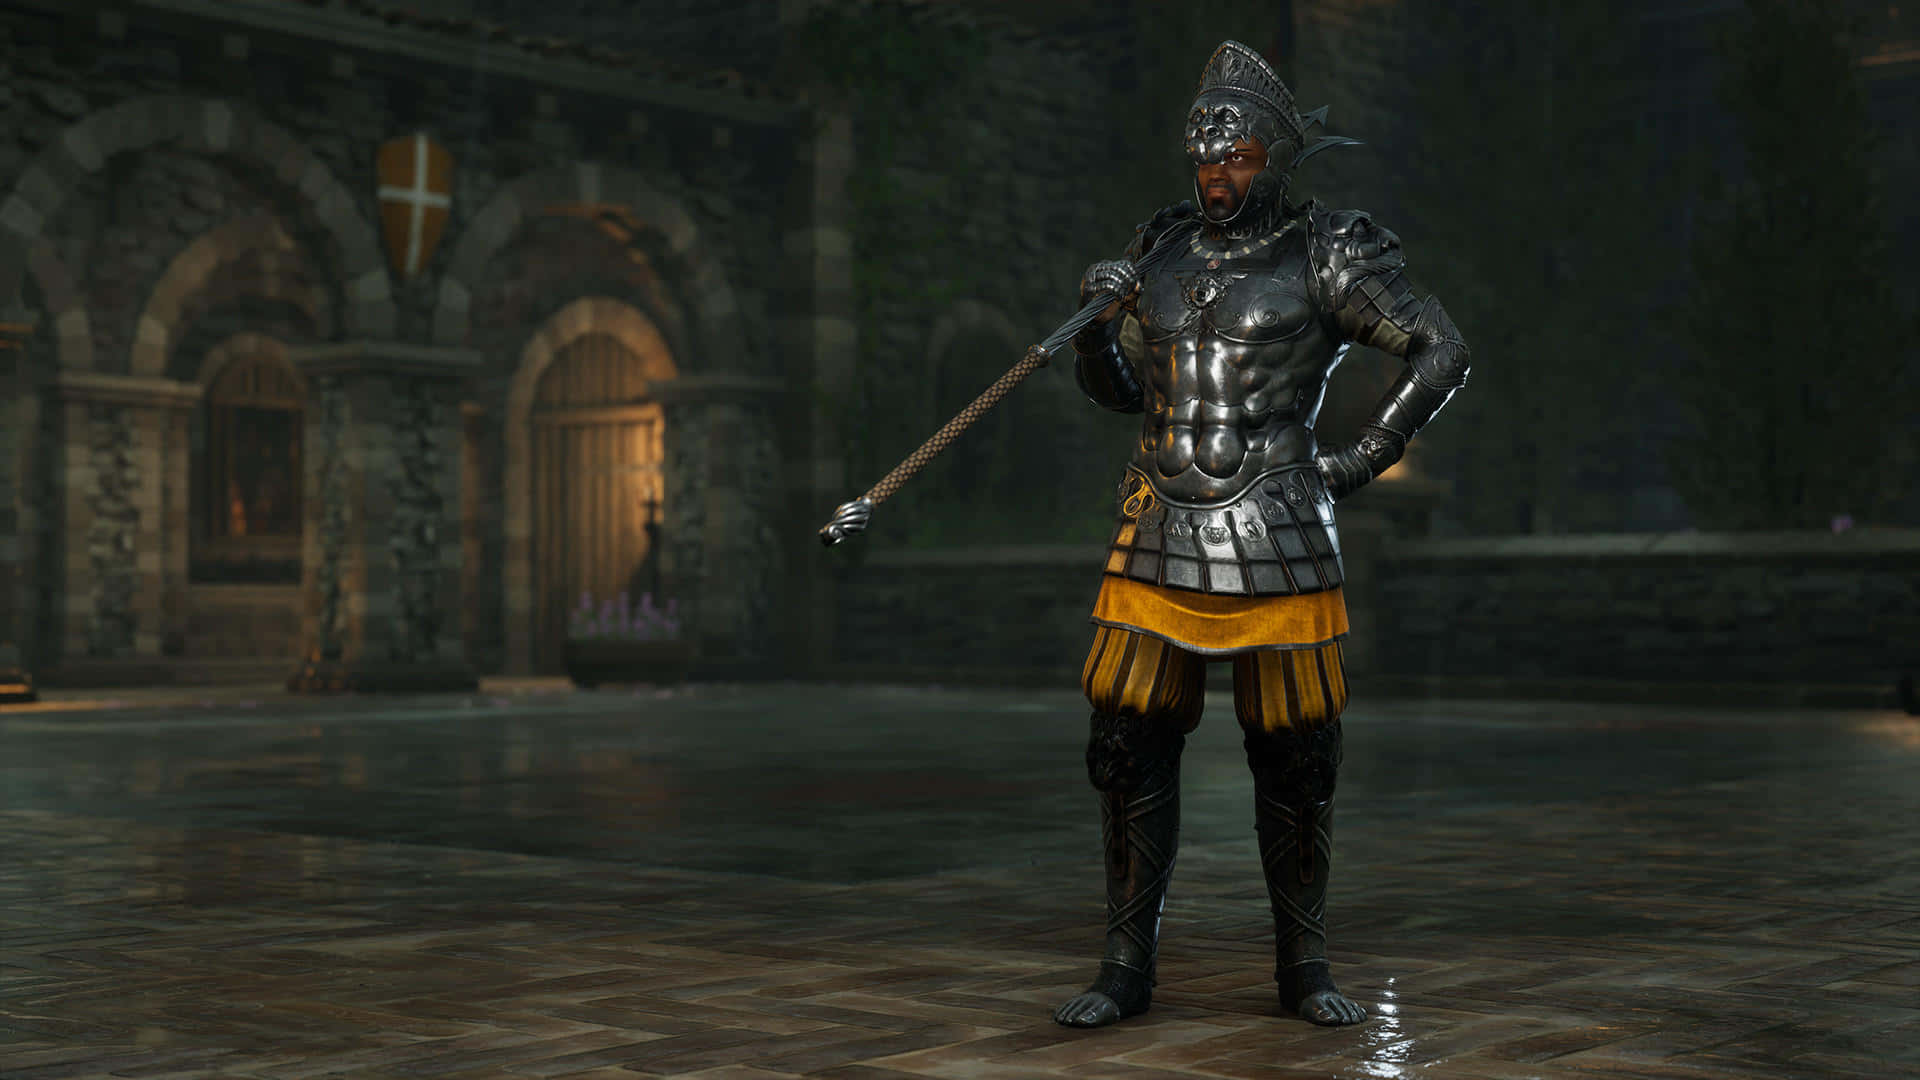 A Knight In Armor Standing In A Hallway